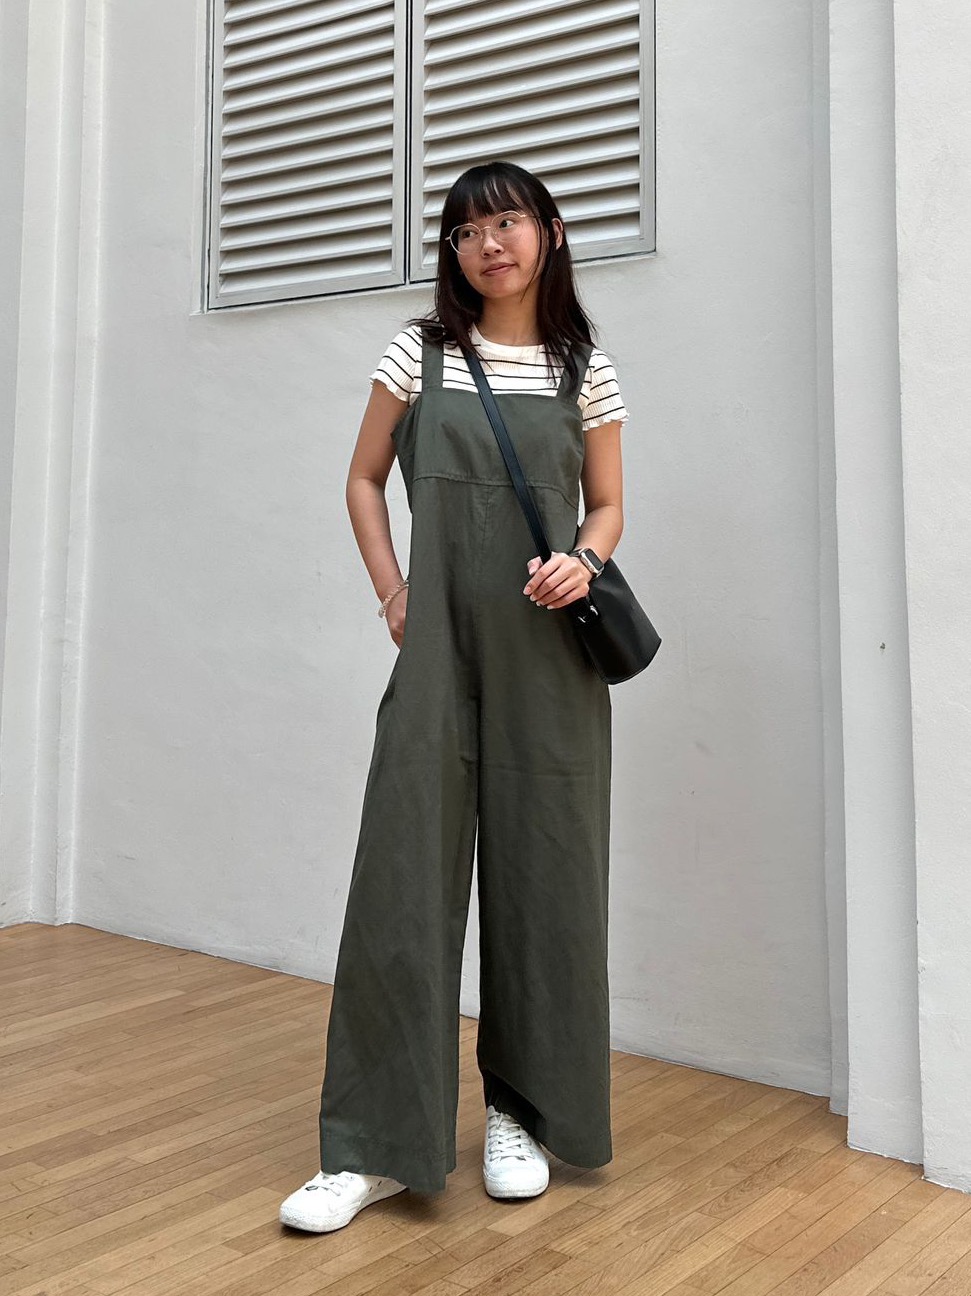 Check styling ideas for「Linen Blend Jumpsuit」